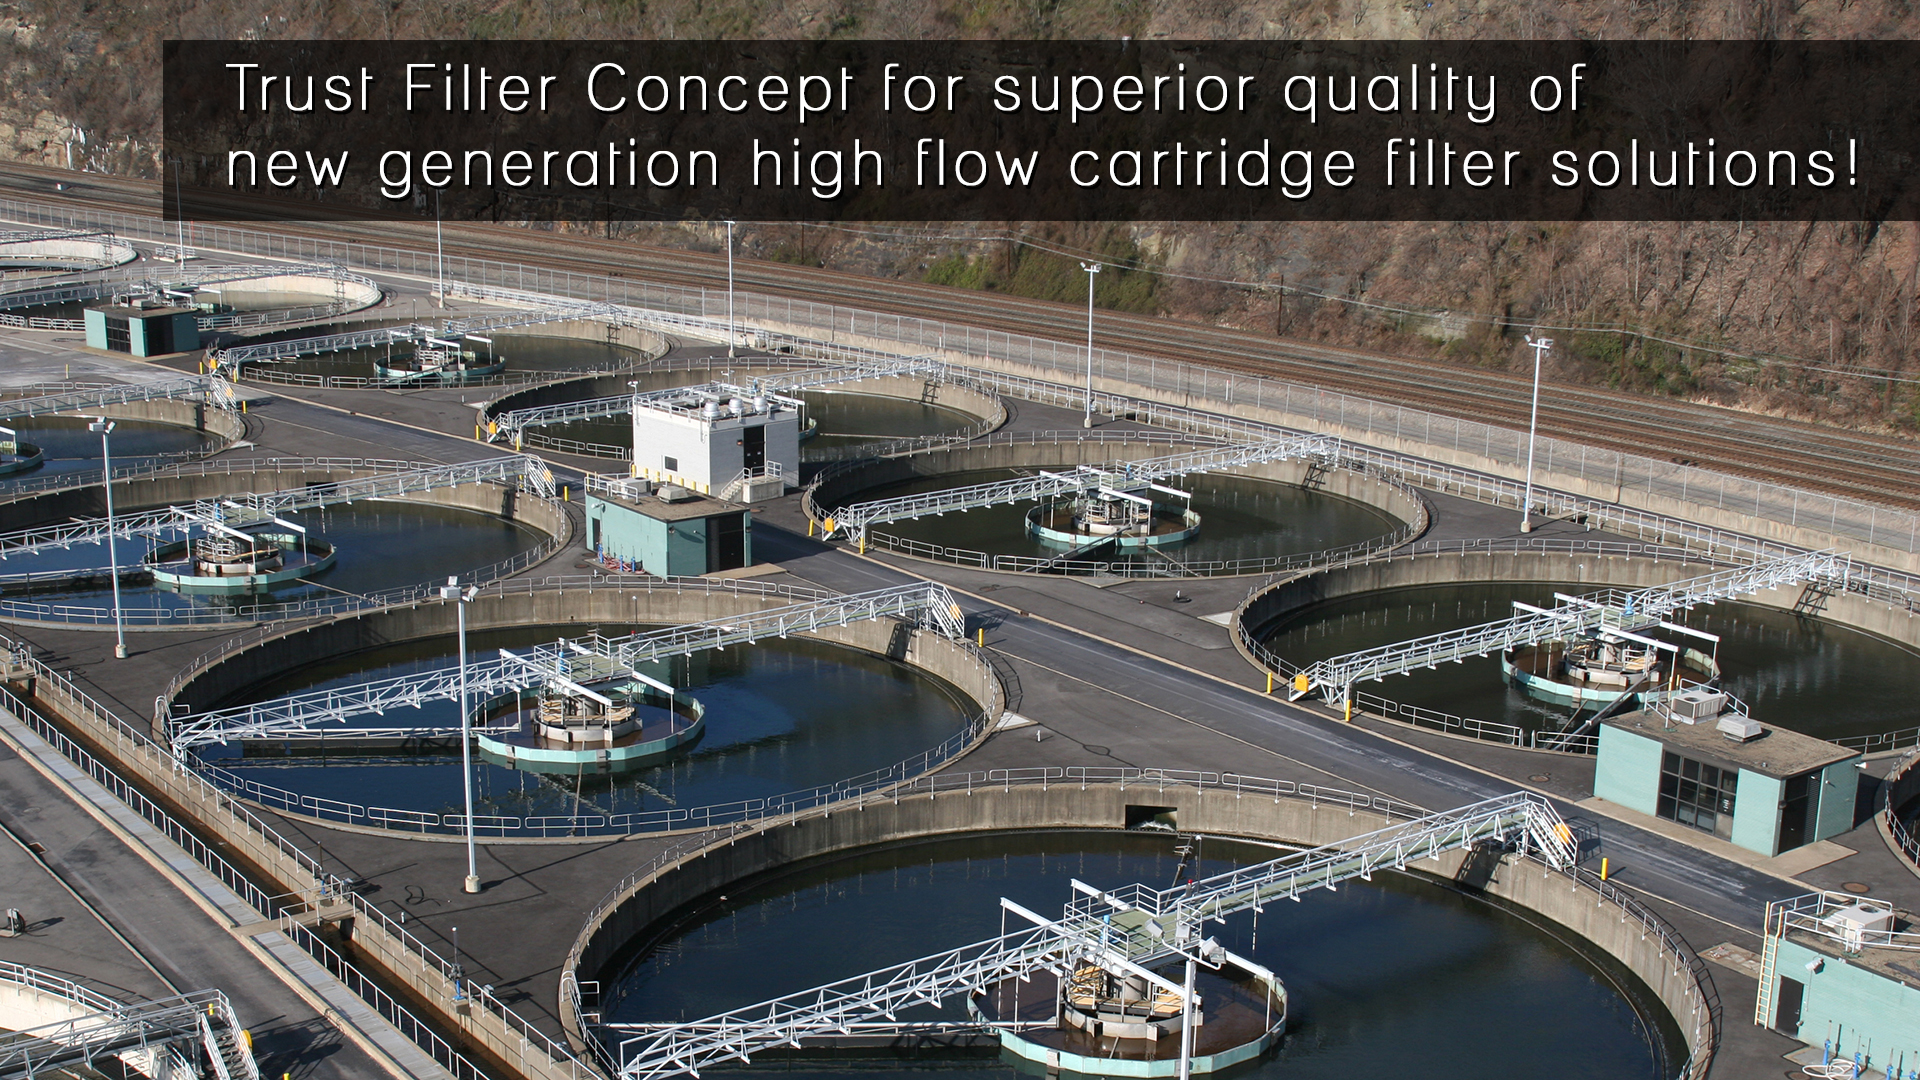 Trust Filter Concept for superior quality of new generation high flow cartridge filter solutions